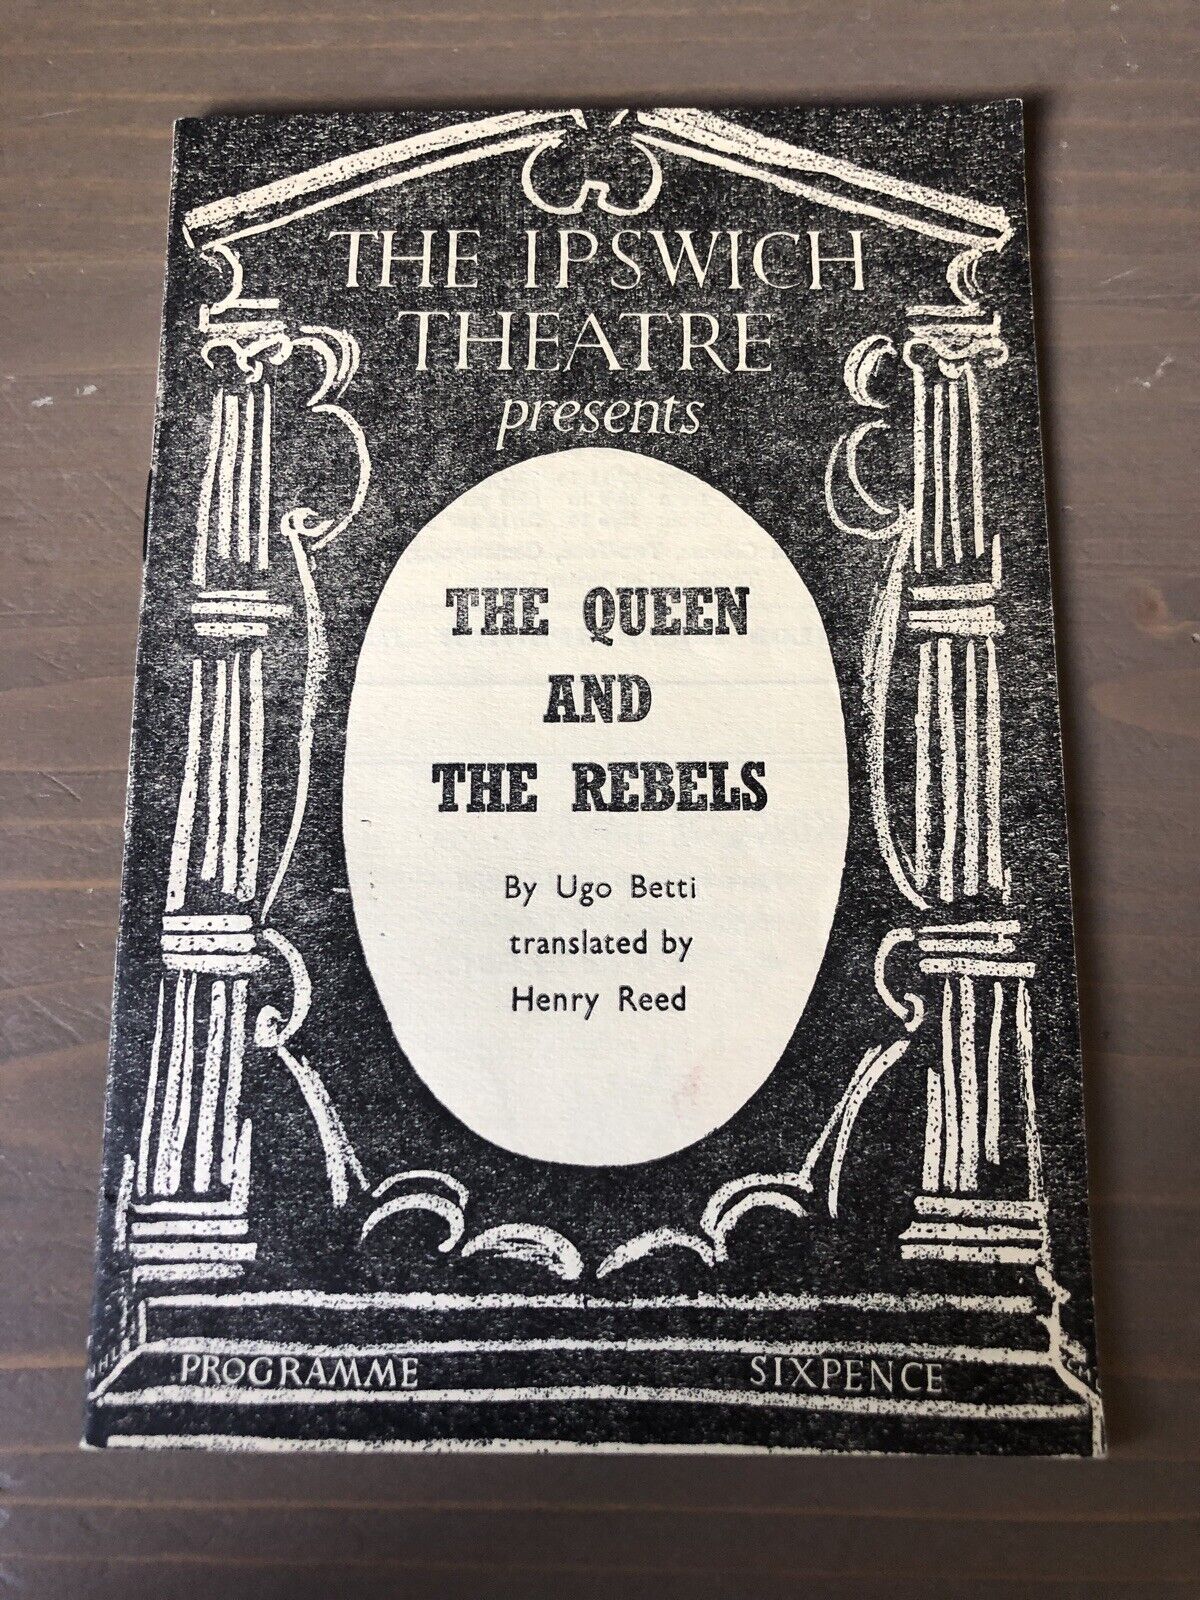 THE QUEEN AND THE REBELS 1957 Ugo Betti Henry Reed Jeremy Geidt Ipswich Theatre